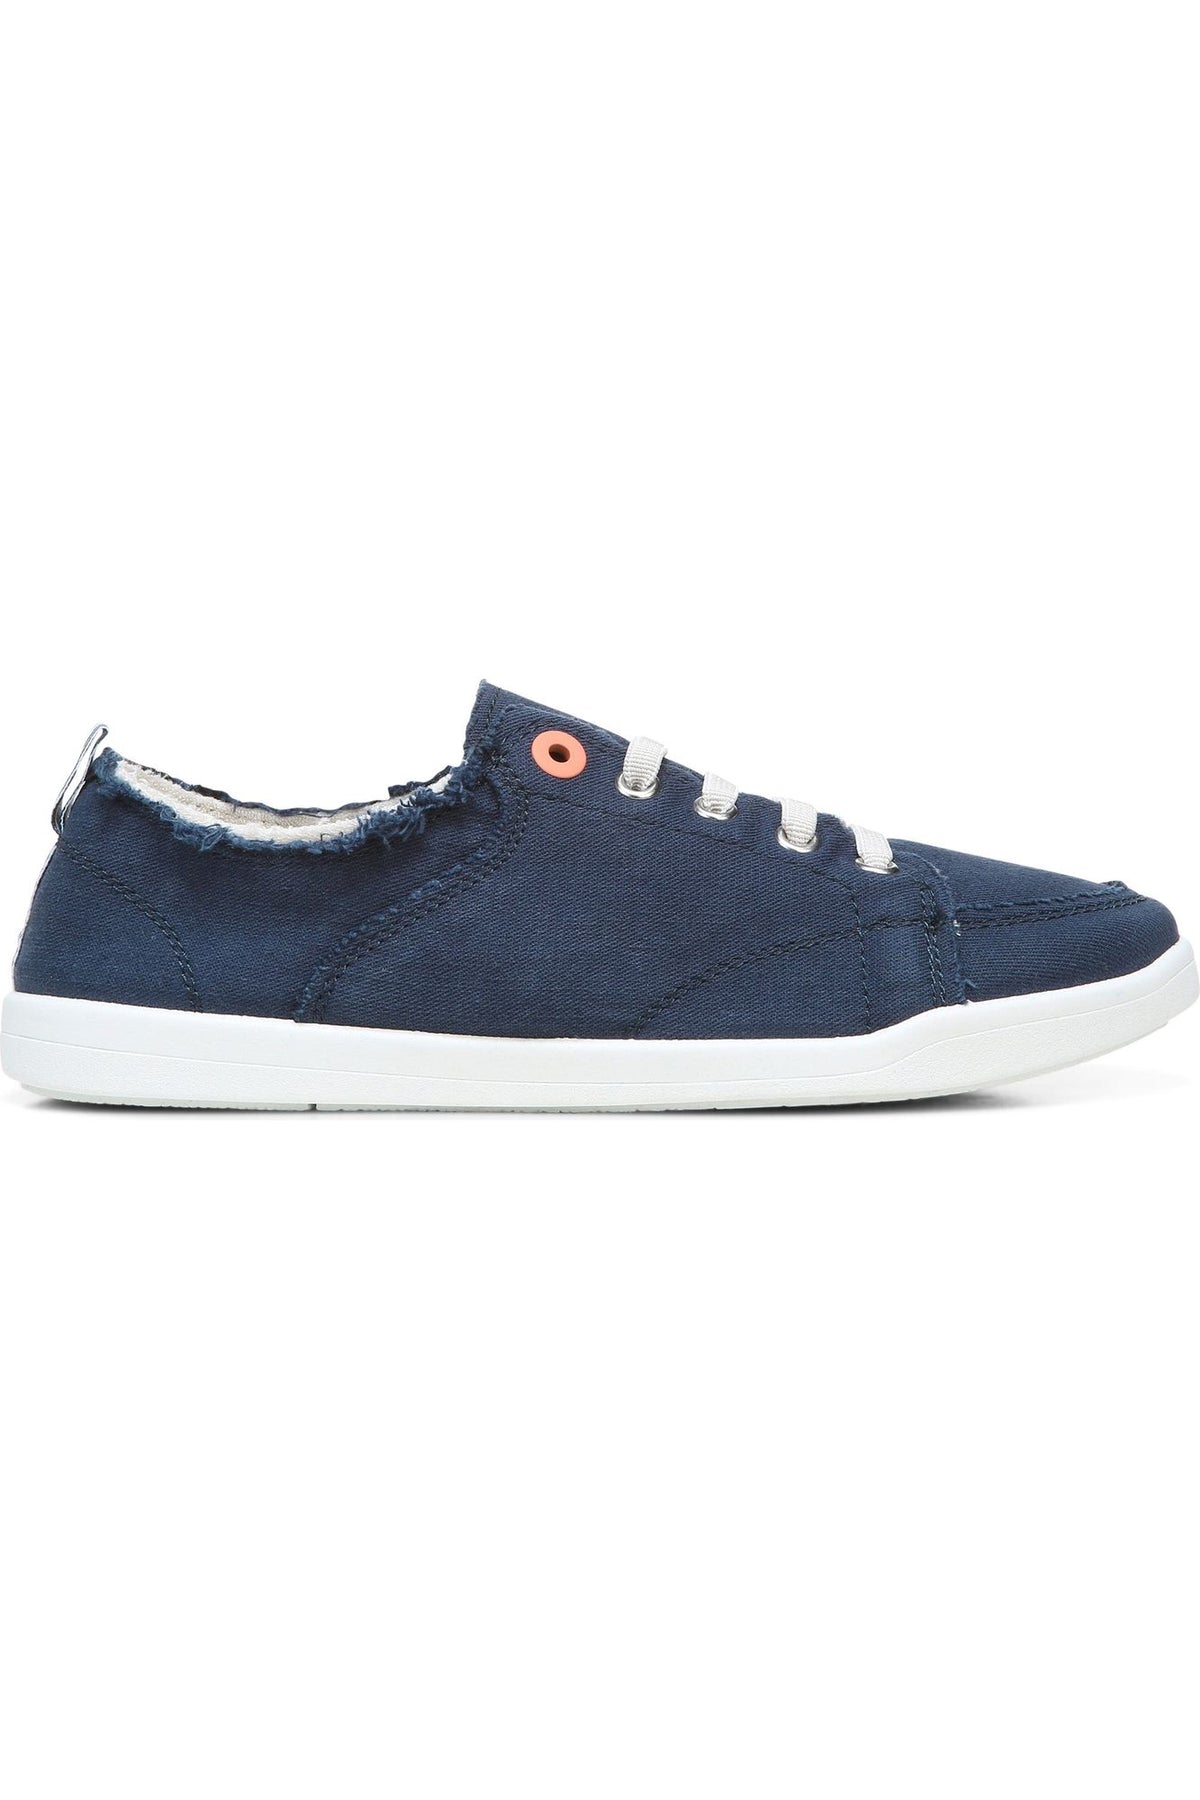 Vionic Canvas Lace-Up Sneaker - Style Pismo NAV, side2